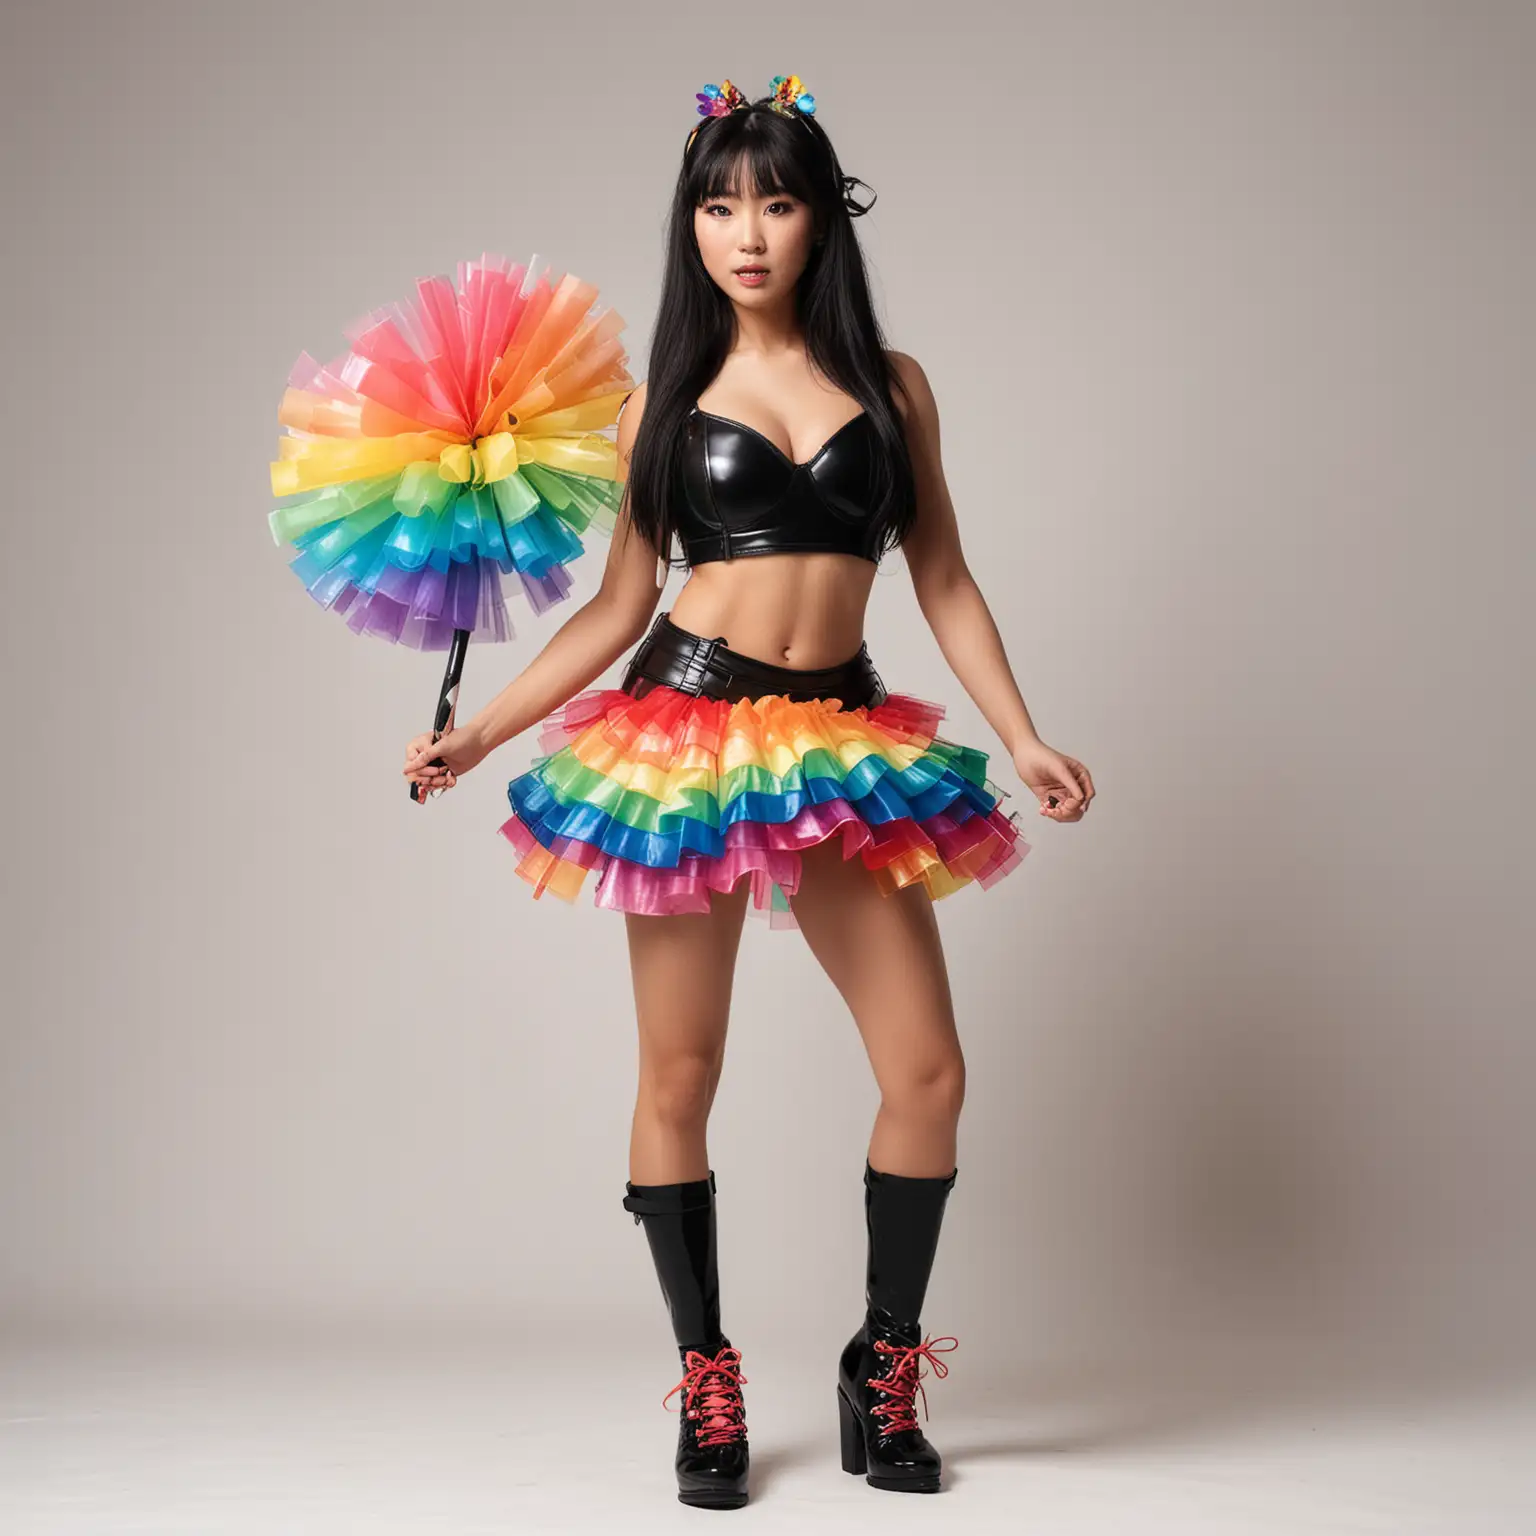 Standing front view, Beautiful toned athletic muscular figure female Japanese supermodel with large breasts, long black hair, in sleeveless black samurai plastic armor, exposed midriff, giant puffy rainbow ballerina tutu, rainbow thigh-high socks, rainbow high-heels, white background